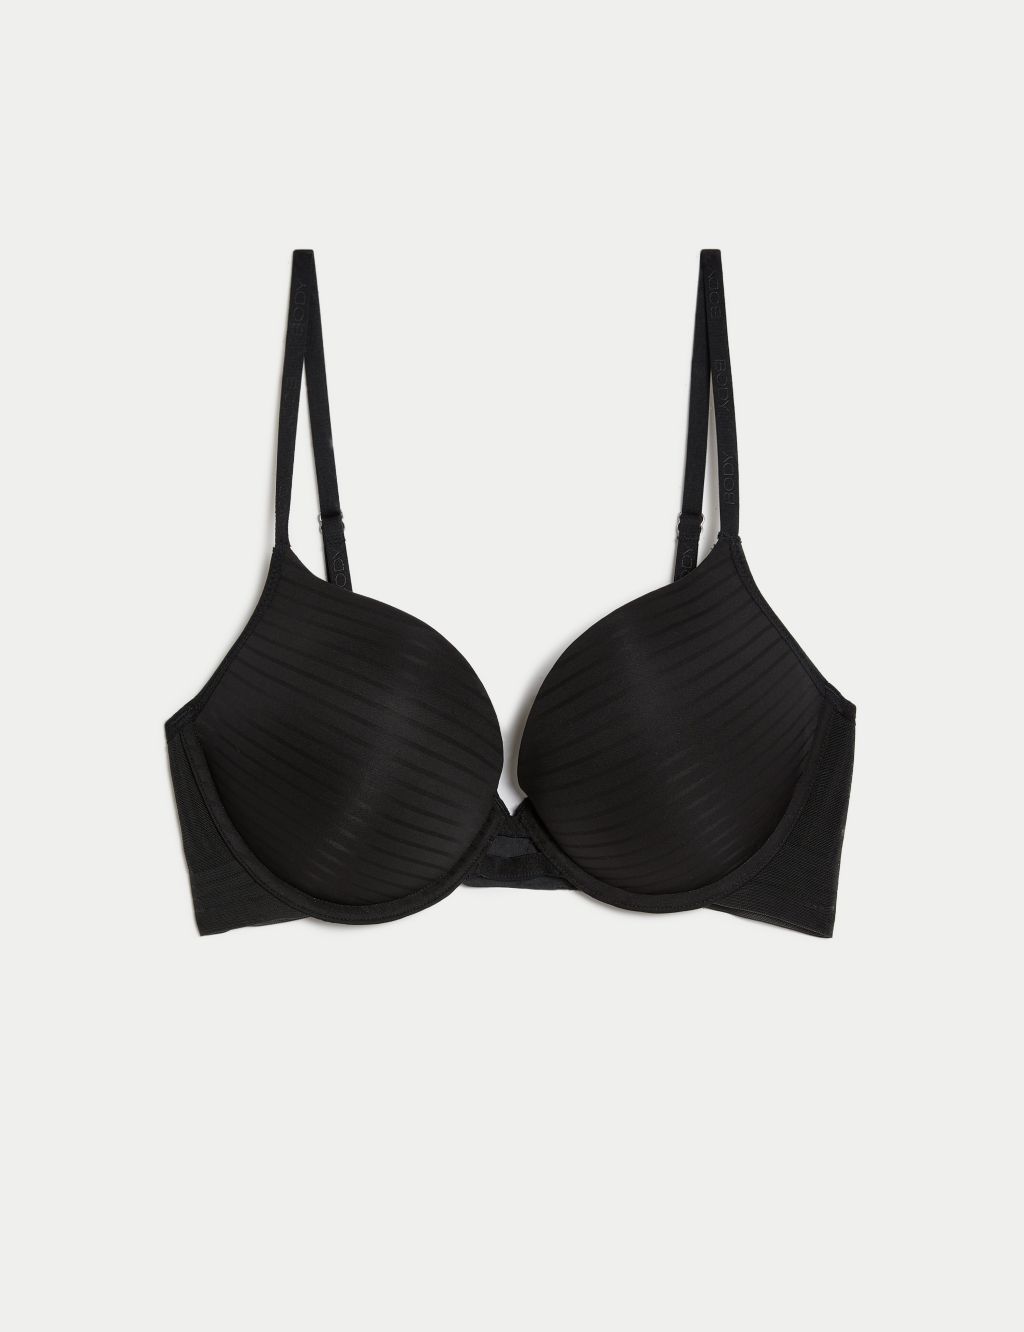 The NEXT Lingeries - Double push up Underwired B cup bra Code no : 1479  Size : 32/70,34/75,36/80 Price : Rs 350/- 3 piece : Rs 900/